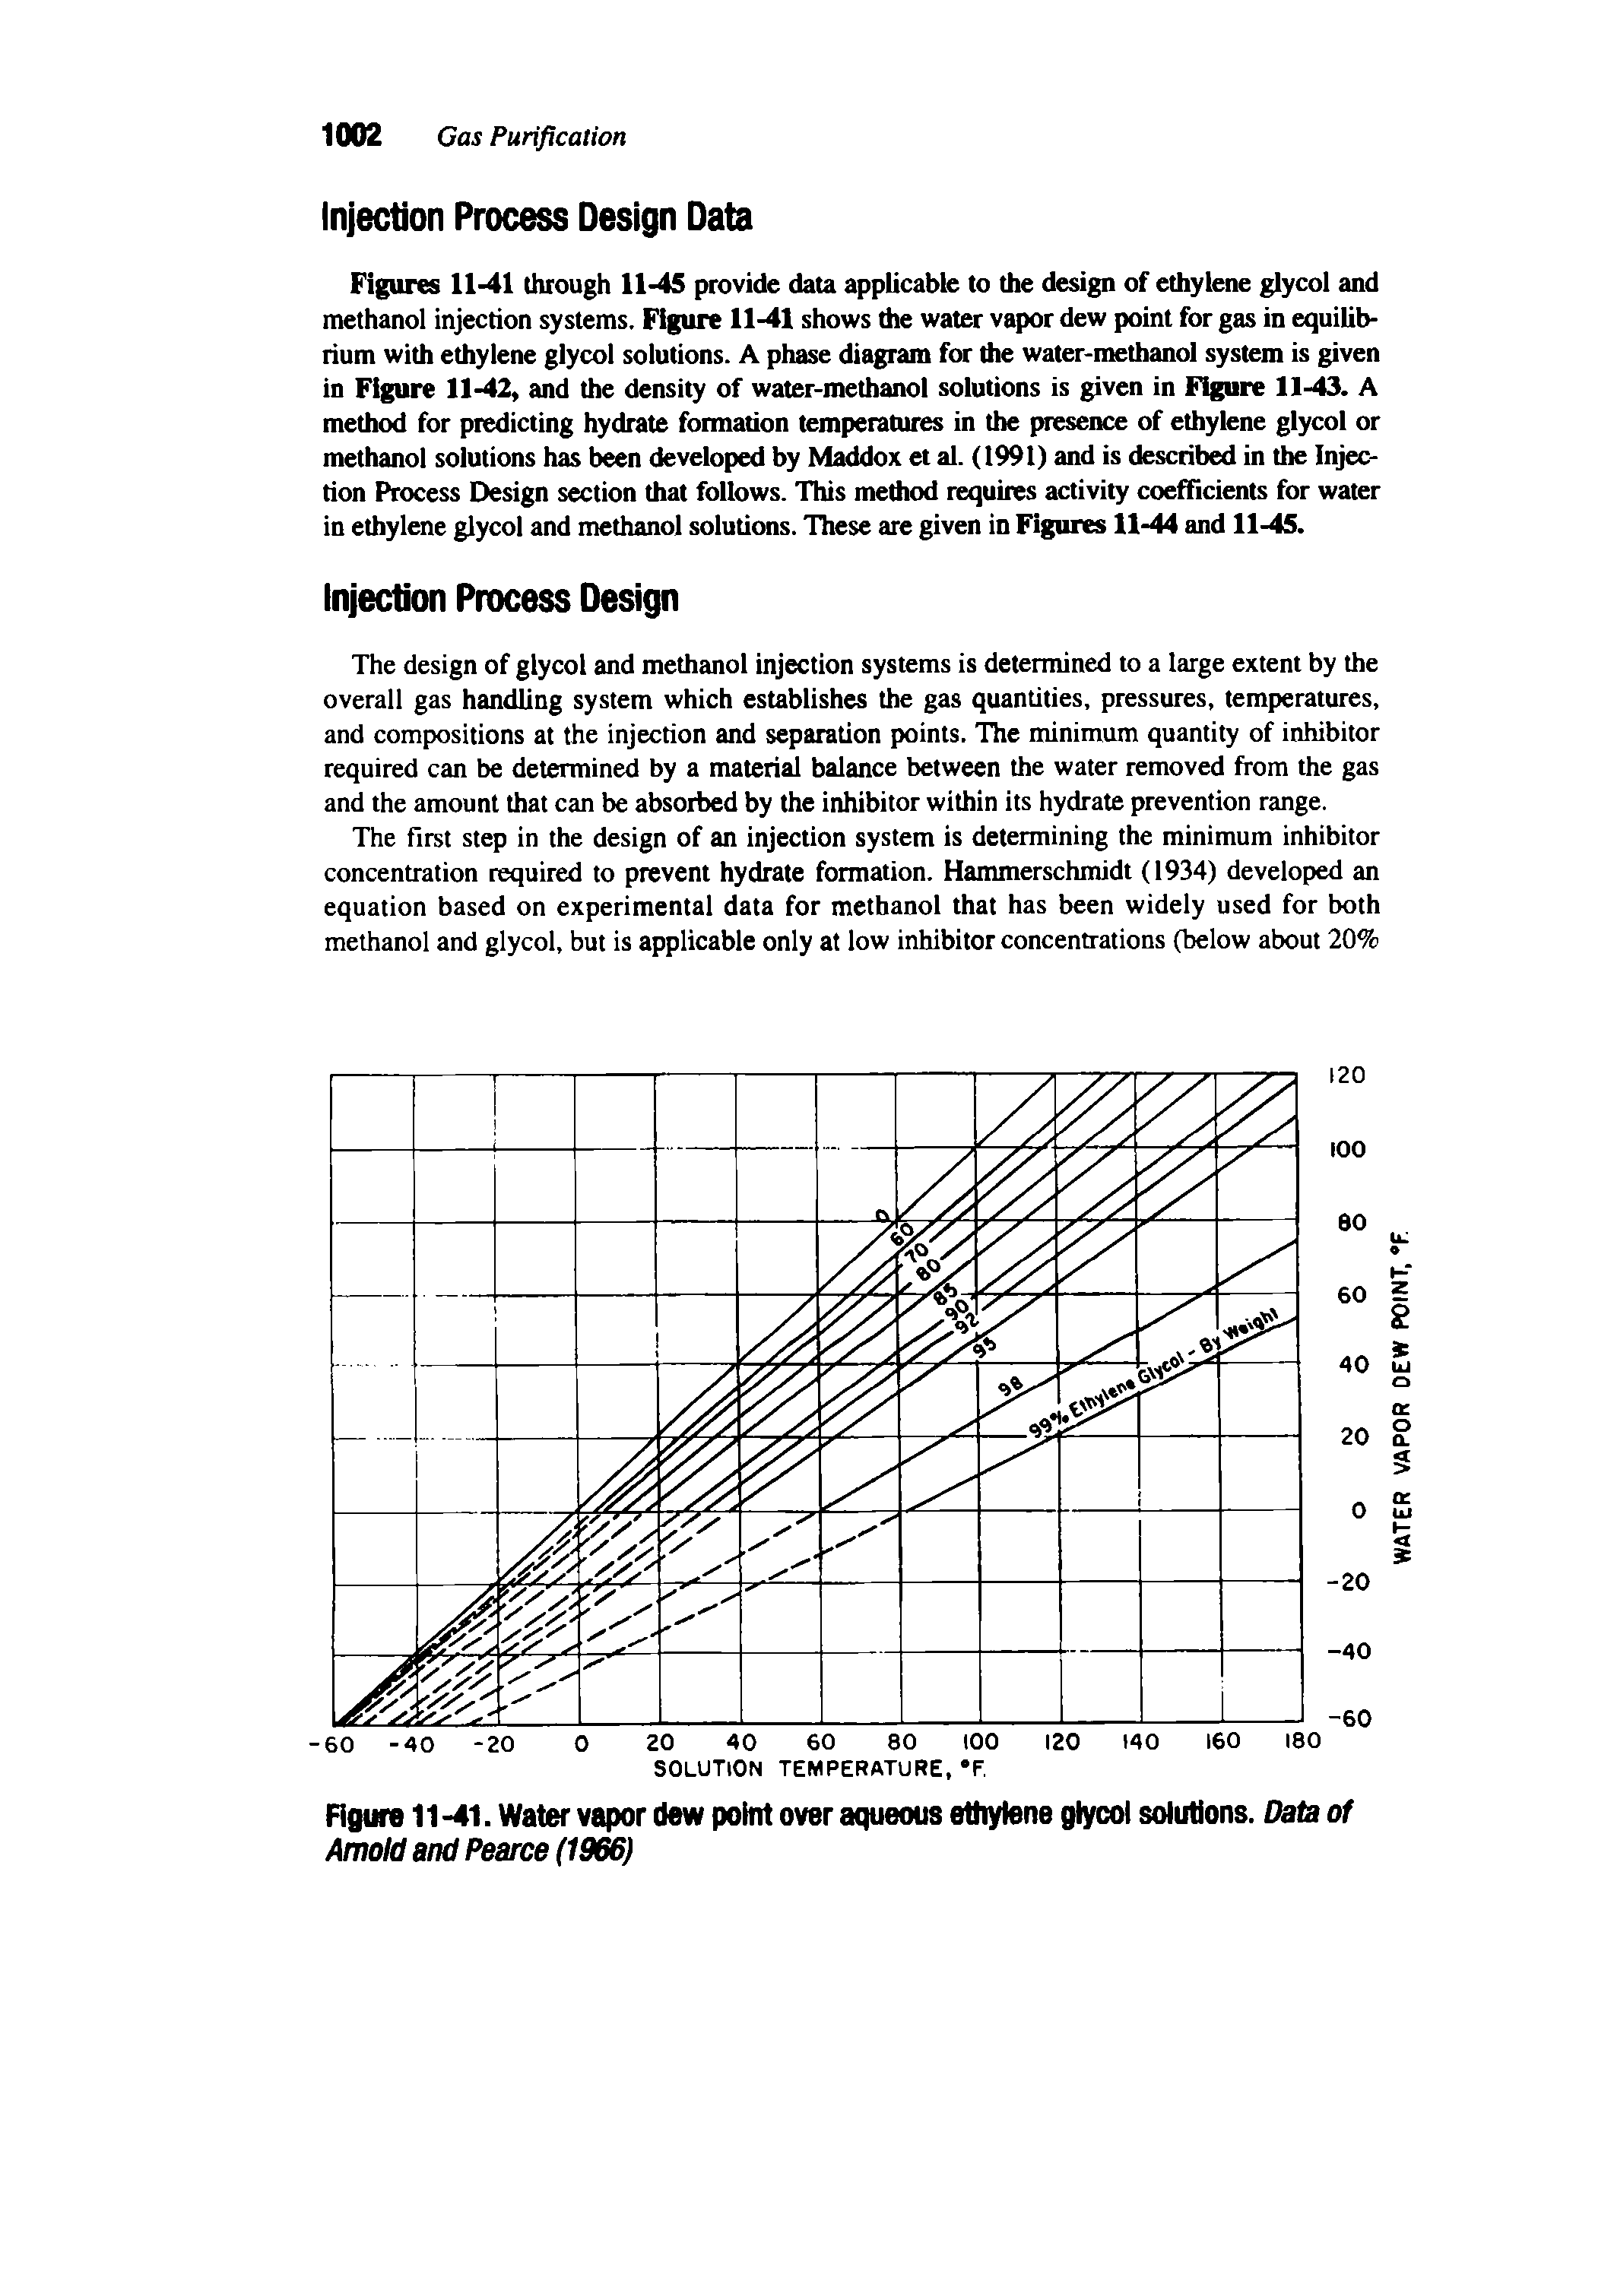 Figure 11-41. Water vapor dew point over aqueous ethylene glycol solutions. Data of AmoU and Pearce (1966)...